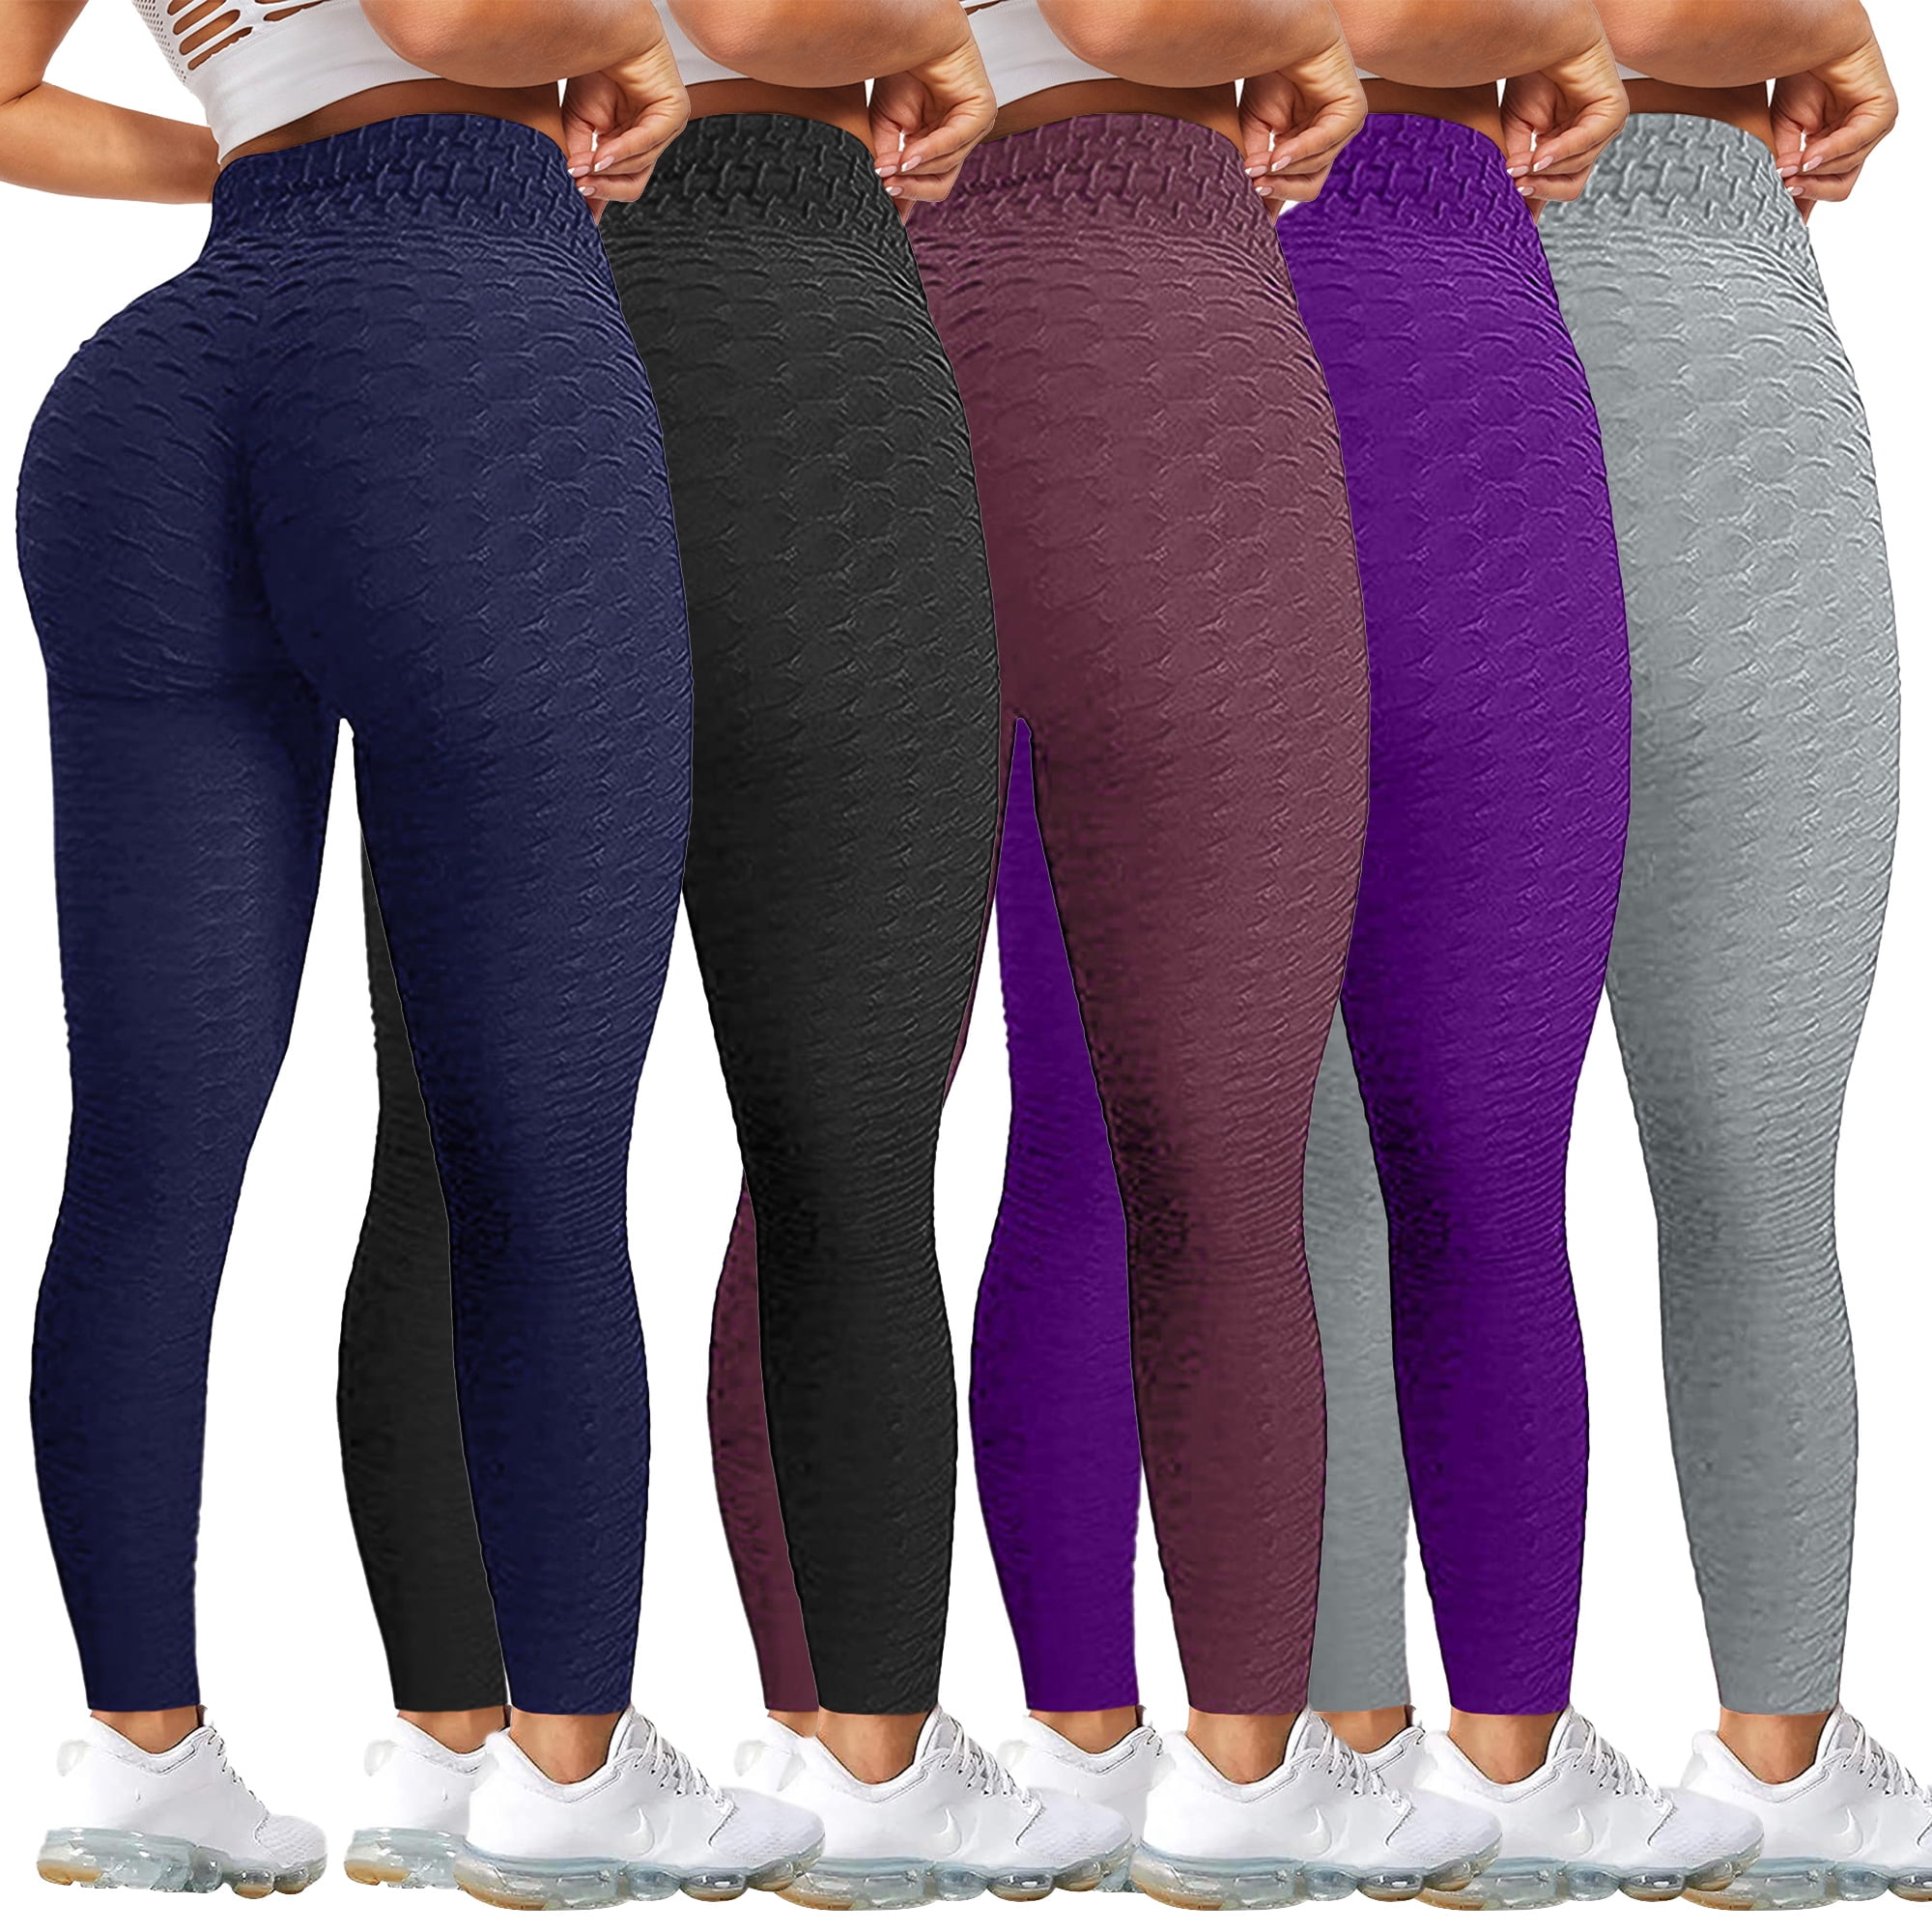 Women's Butt Life Anti-Cellulite Leggings Textured Workout Sport Tights High Waisted Yoga Pants